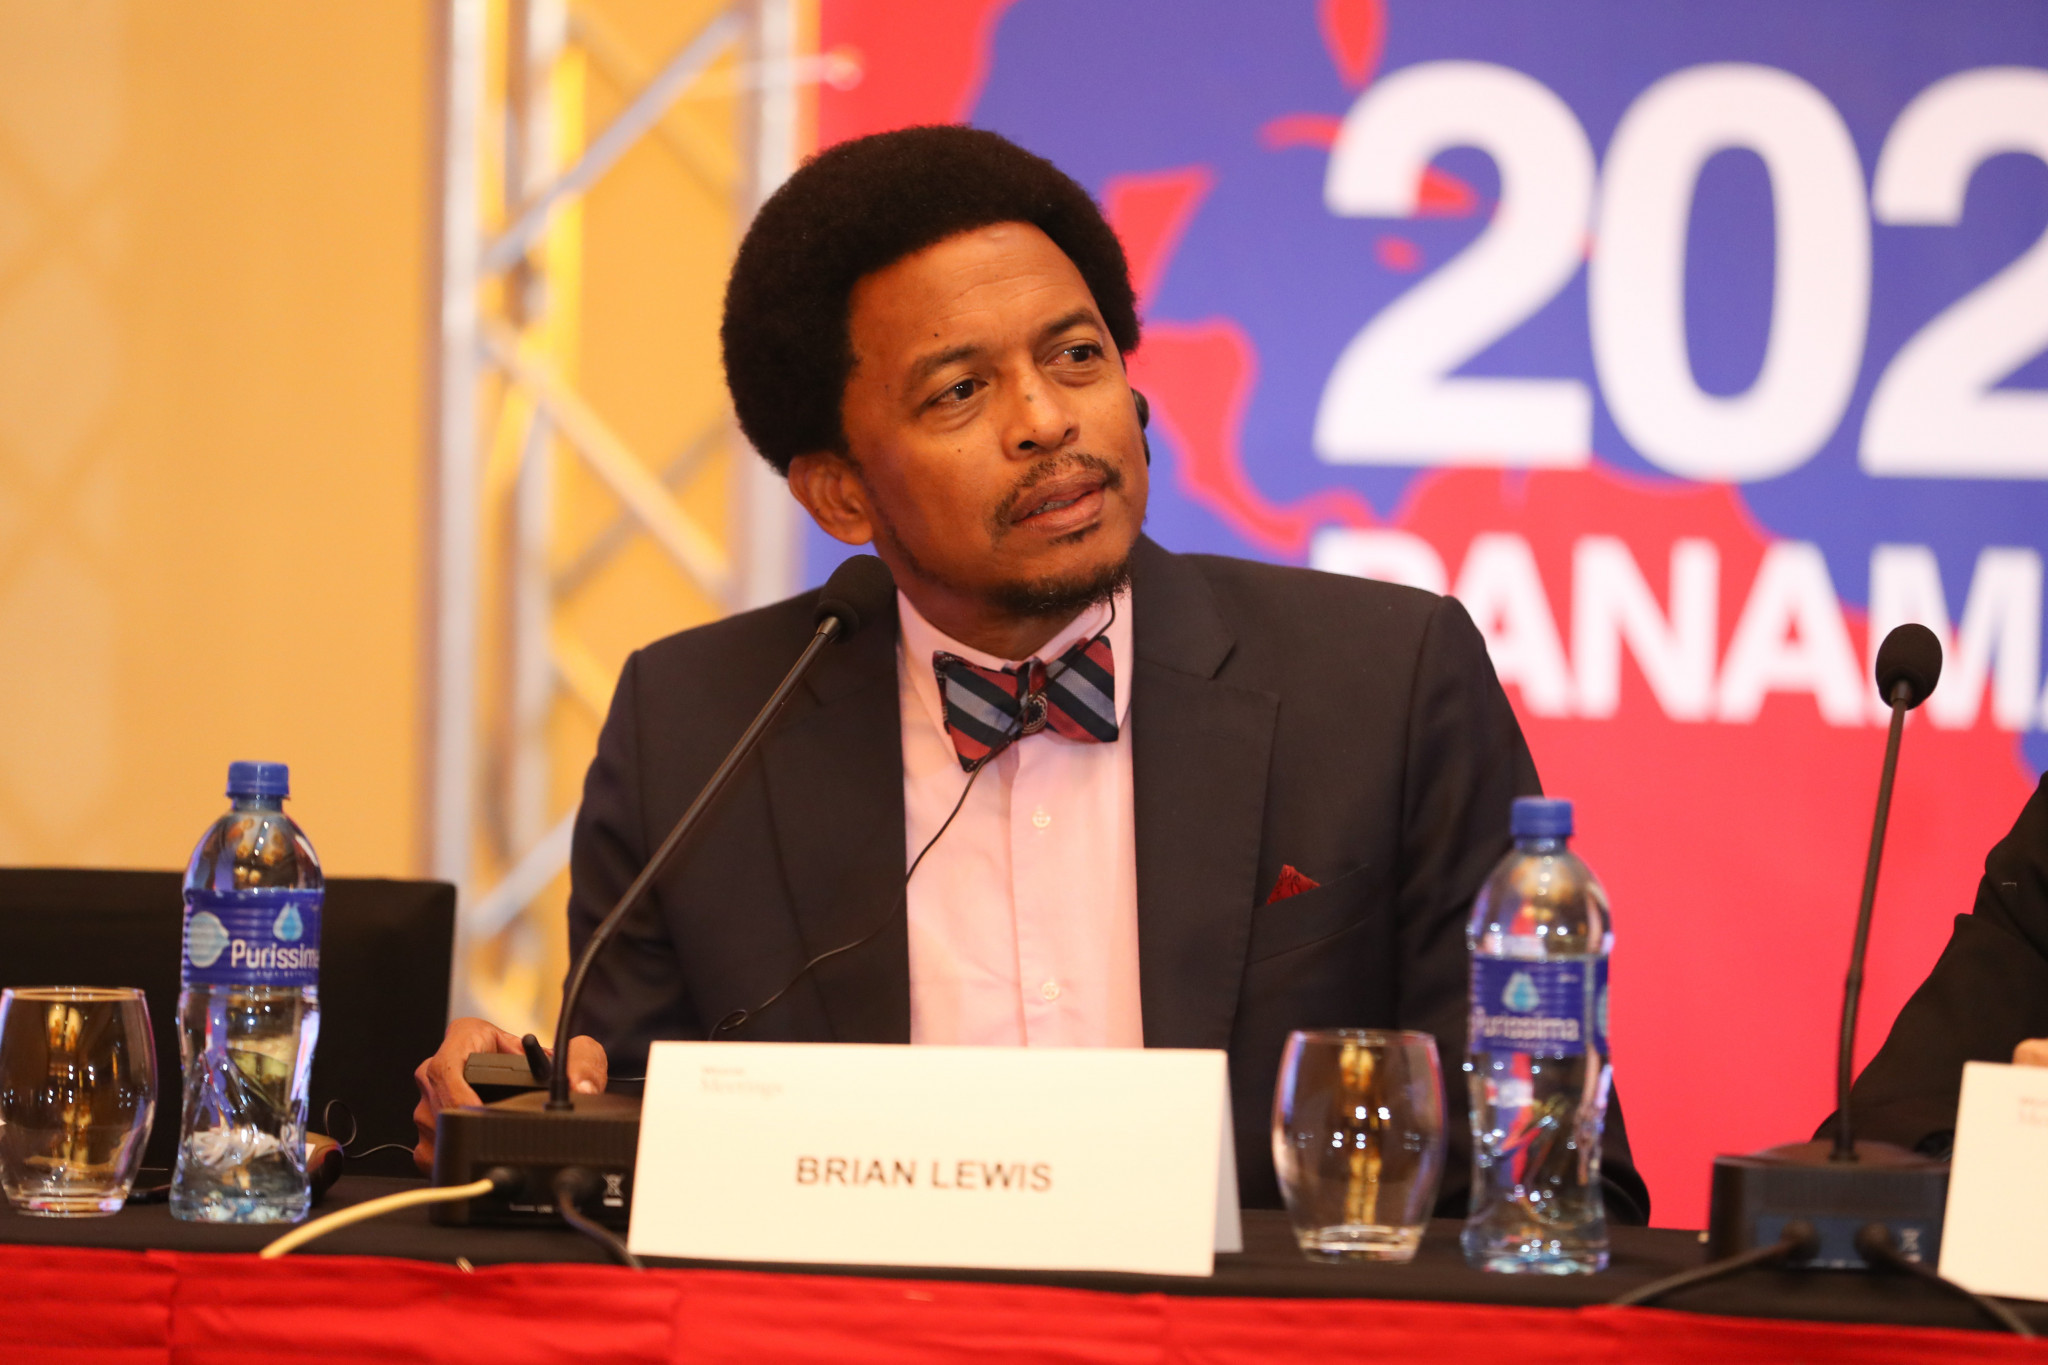 TTOC President Lewis urges AIBA to change culture at Continental Forum